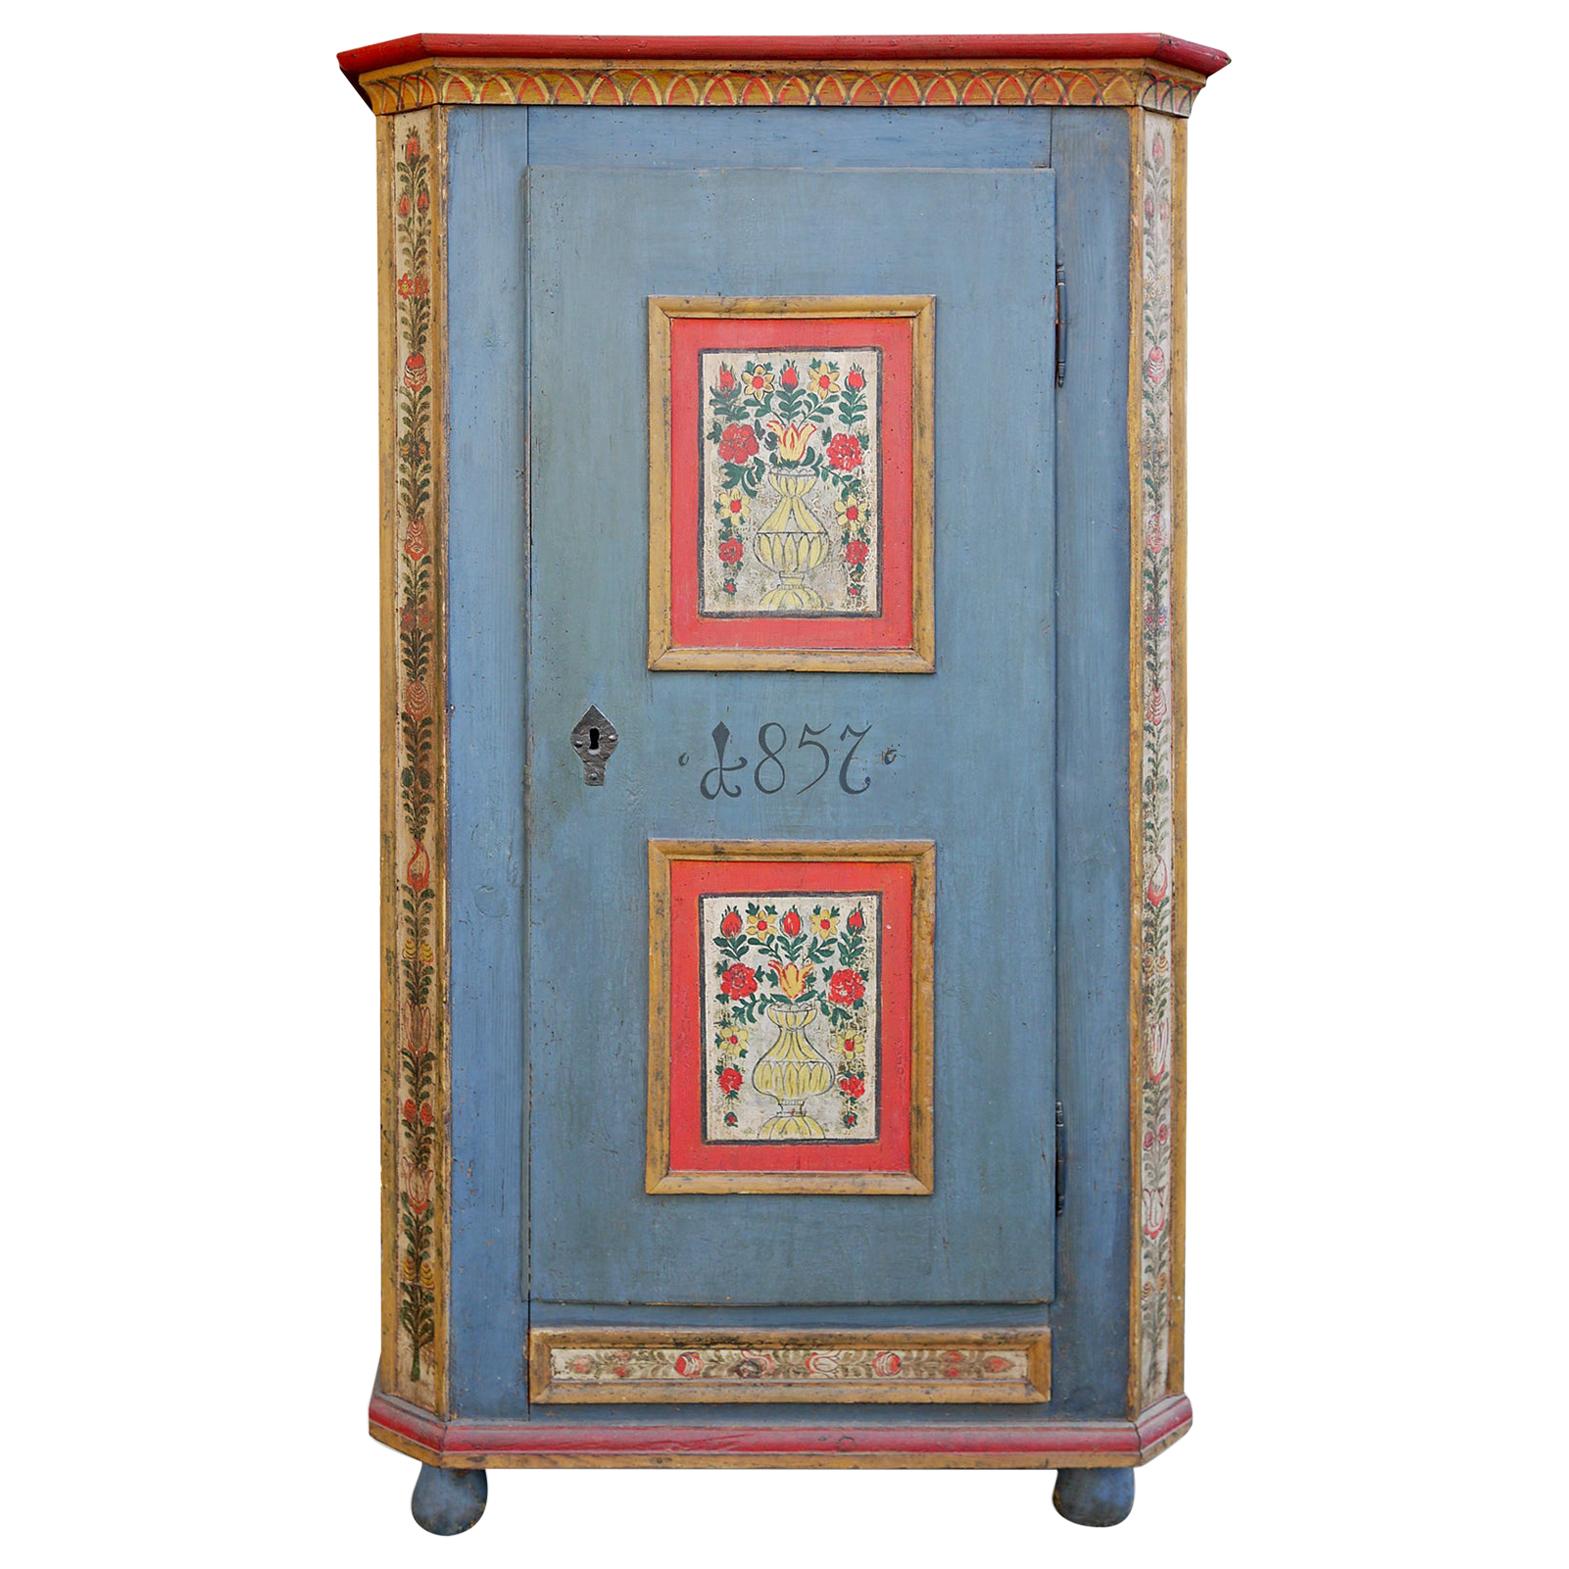 Light Blue Floral Painted One Door Cabinet - Dsated 1857